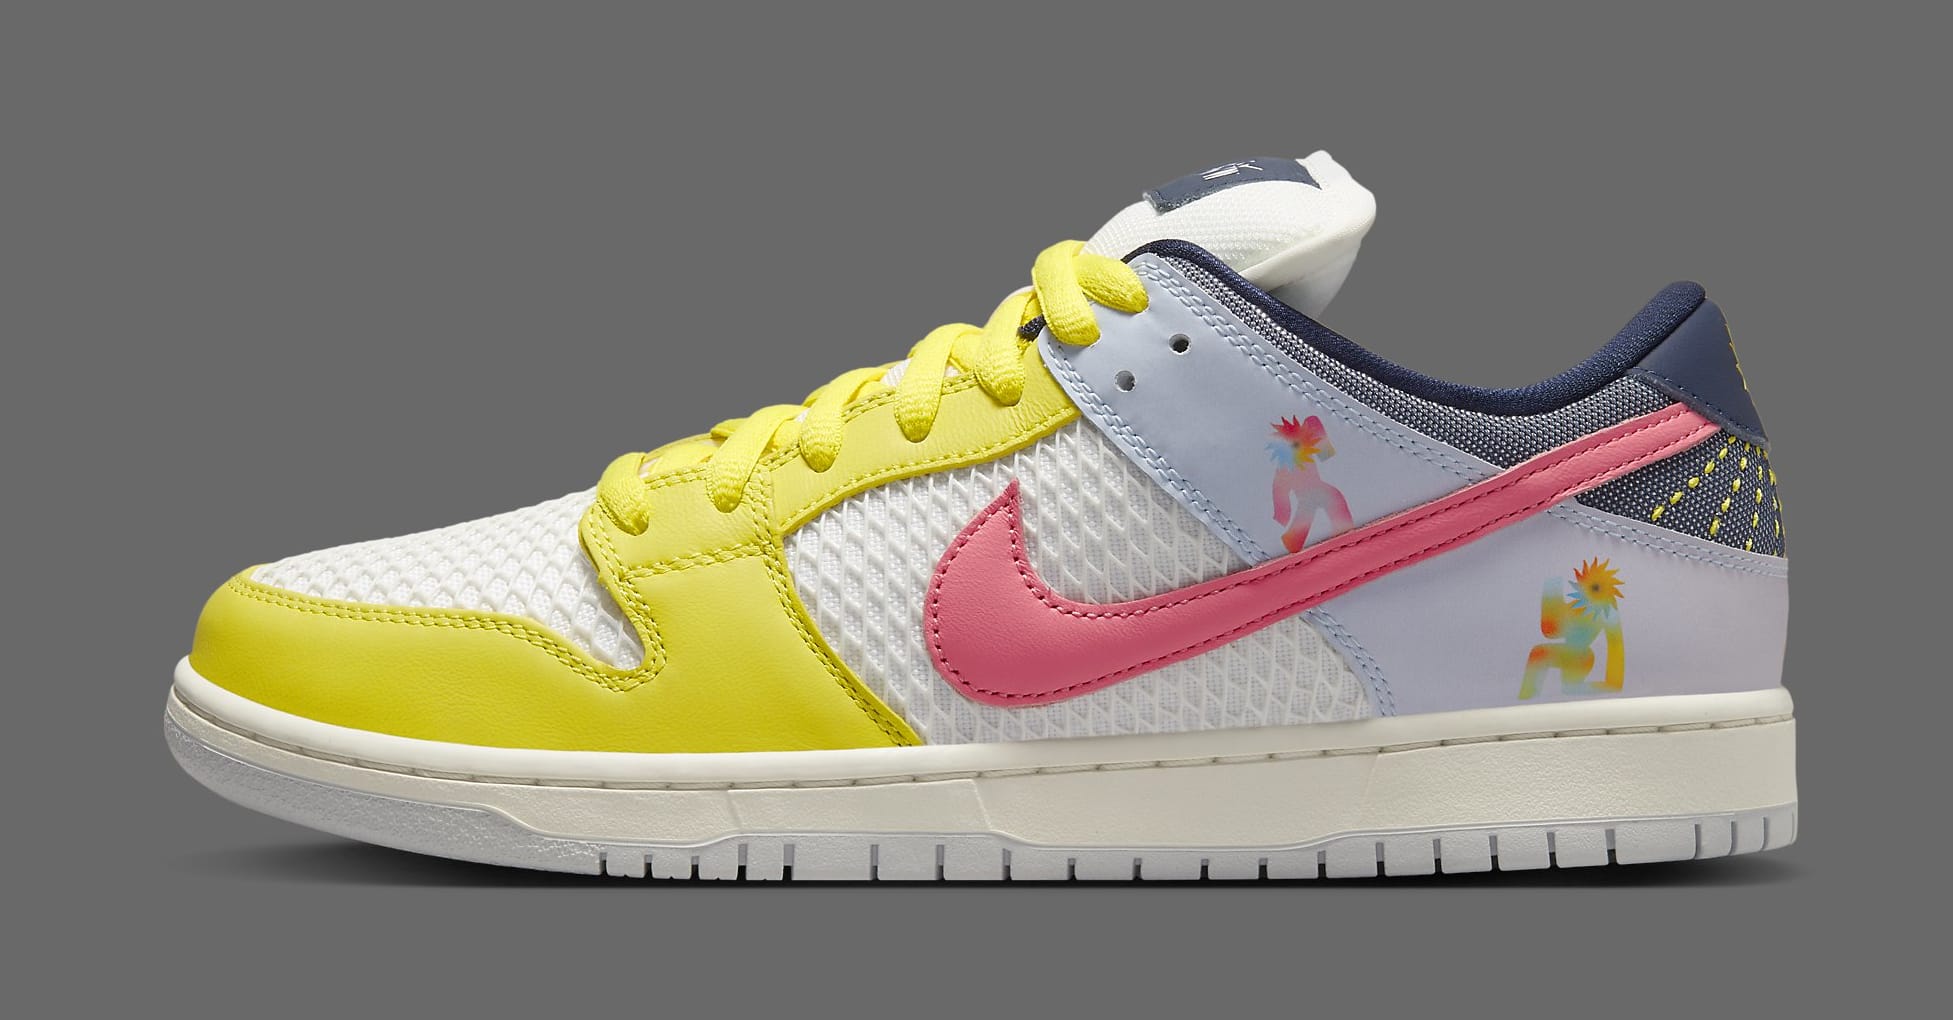 Nike SB Dunk Low 'Be True' DX5933 900 Lateral